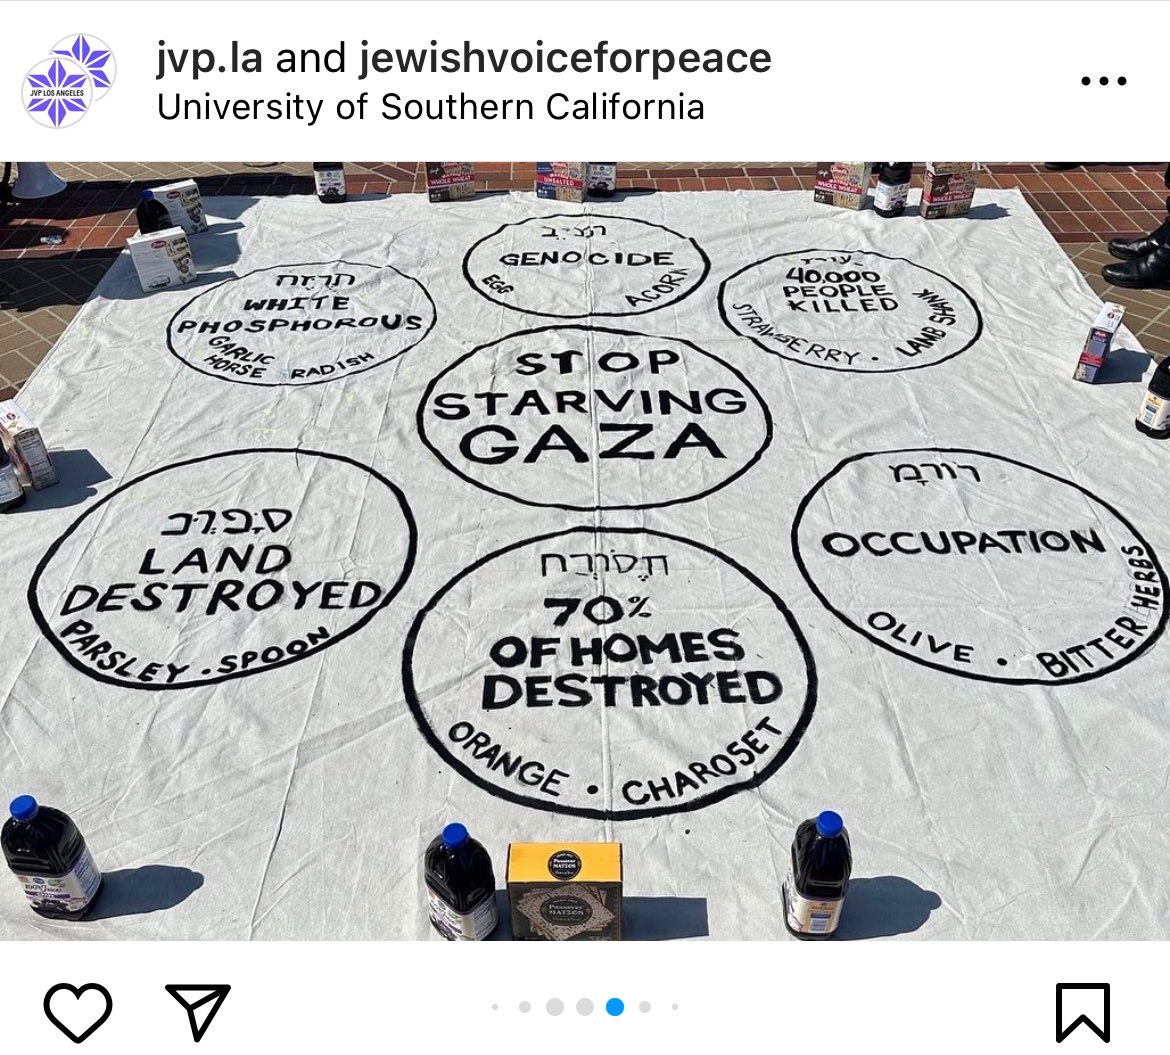 Nothing says “we’re real Jews” like writing Hebrew words in the wrong direction